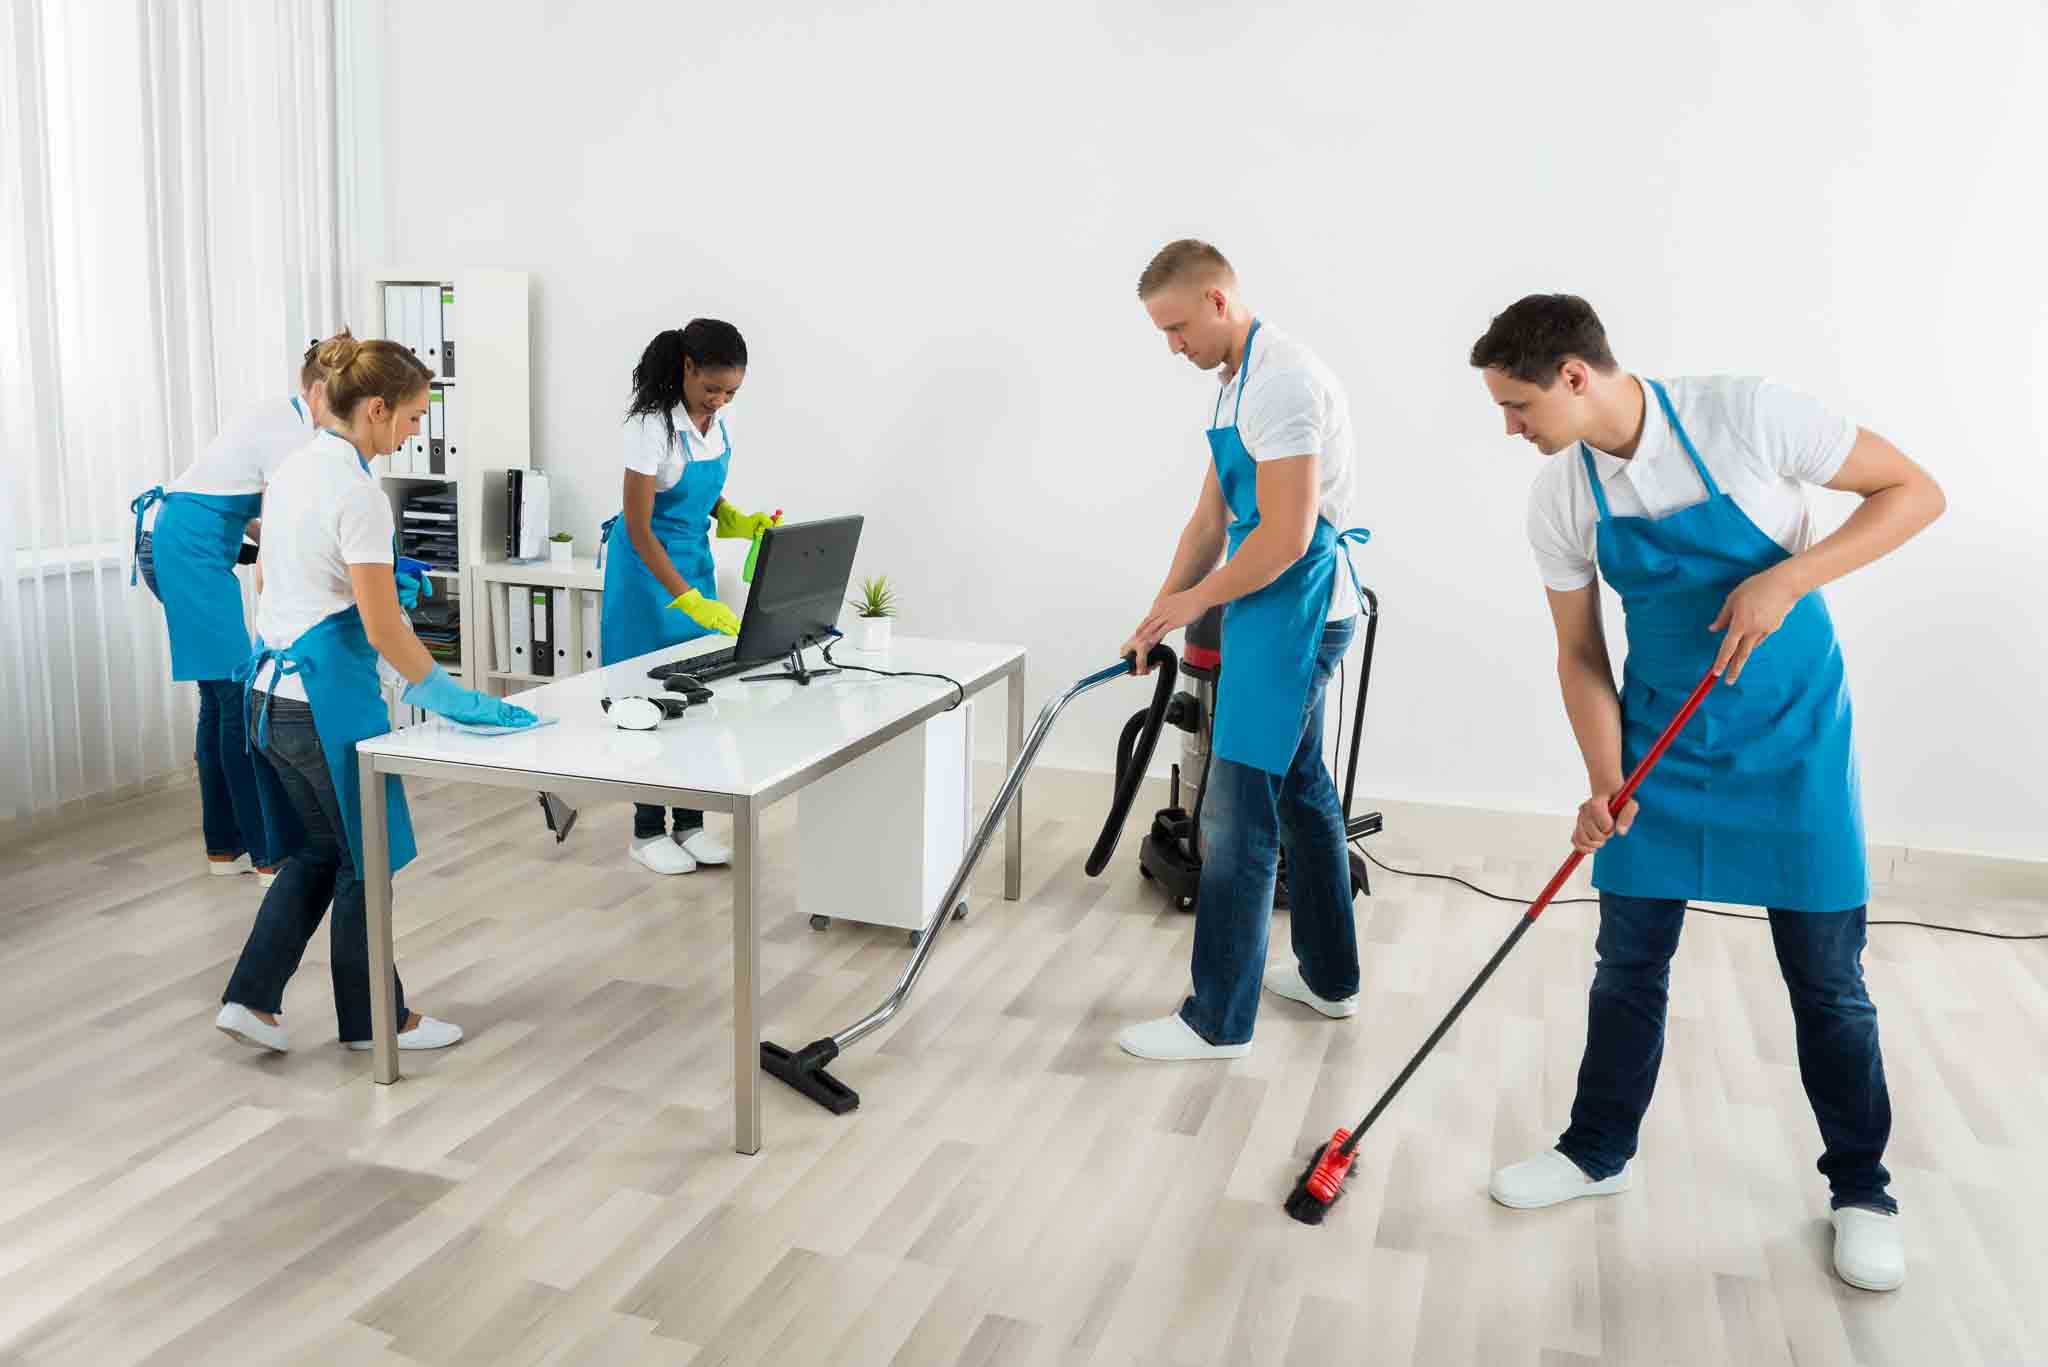 sydney-commercial-cleaners-near-me-office-cleaning-total-focus-cleaning-sydney-brisbane-melbourne-nsw-vic-qld-australia6